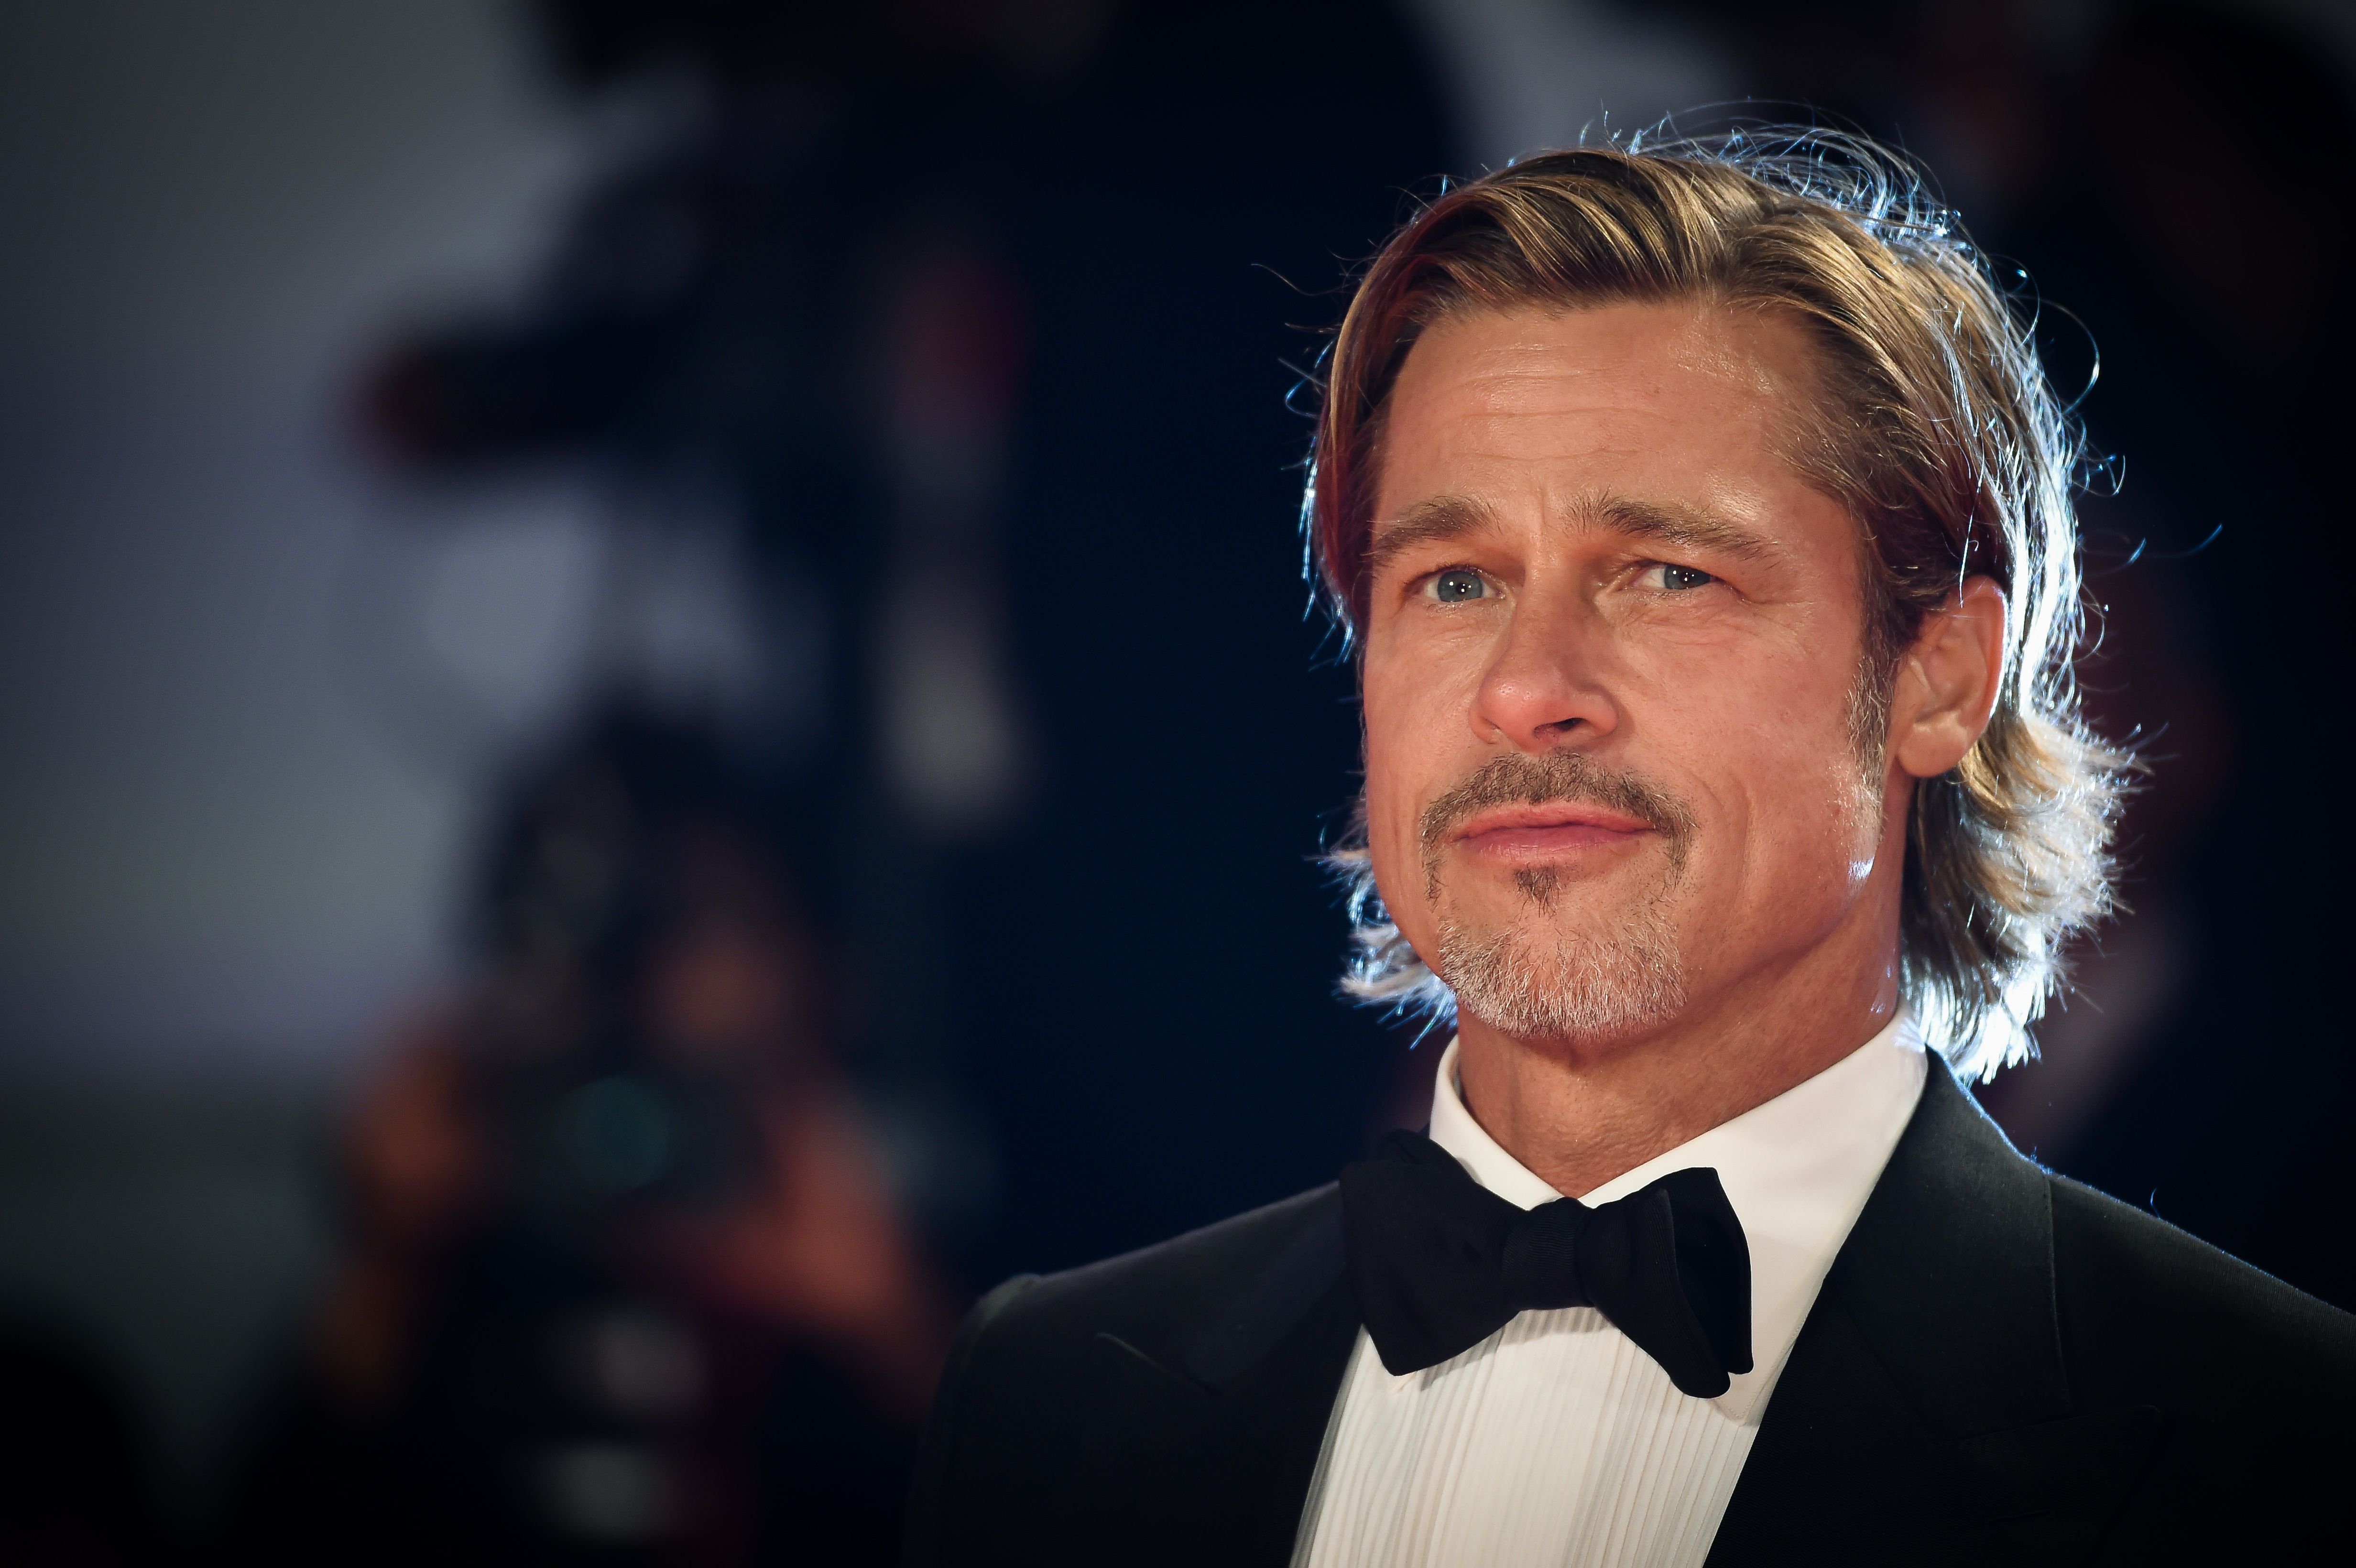 Does Brad Pitt Still Sell Watches? - The New York Times